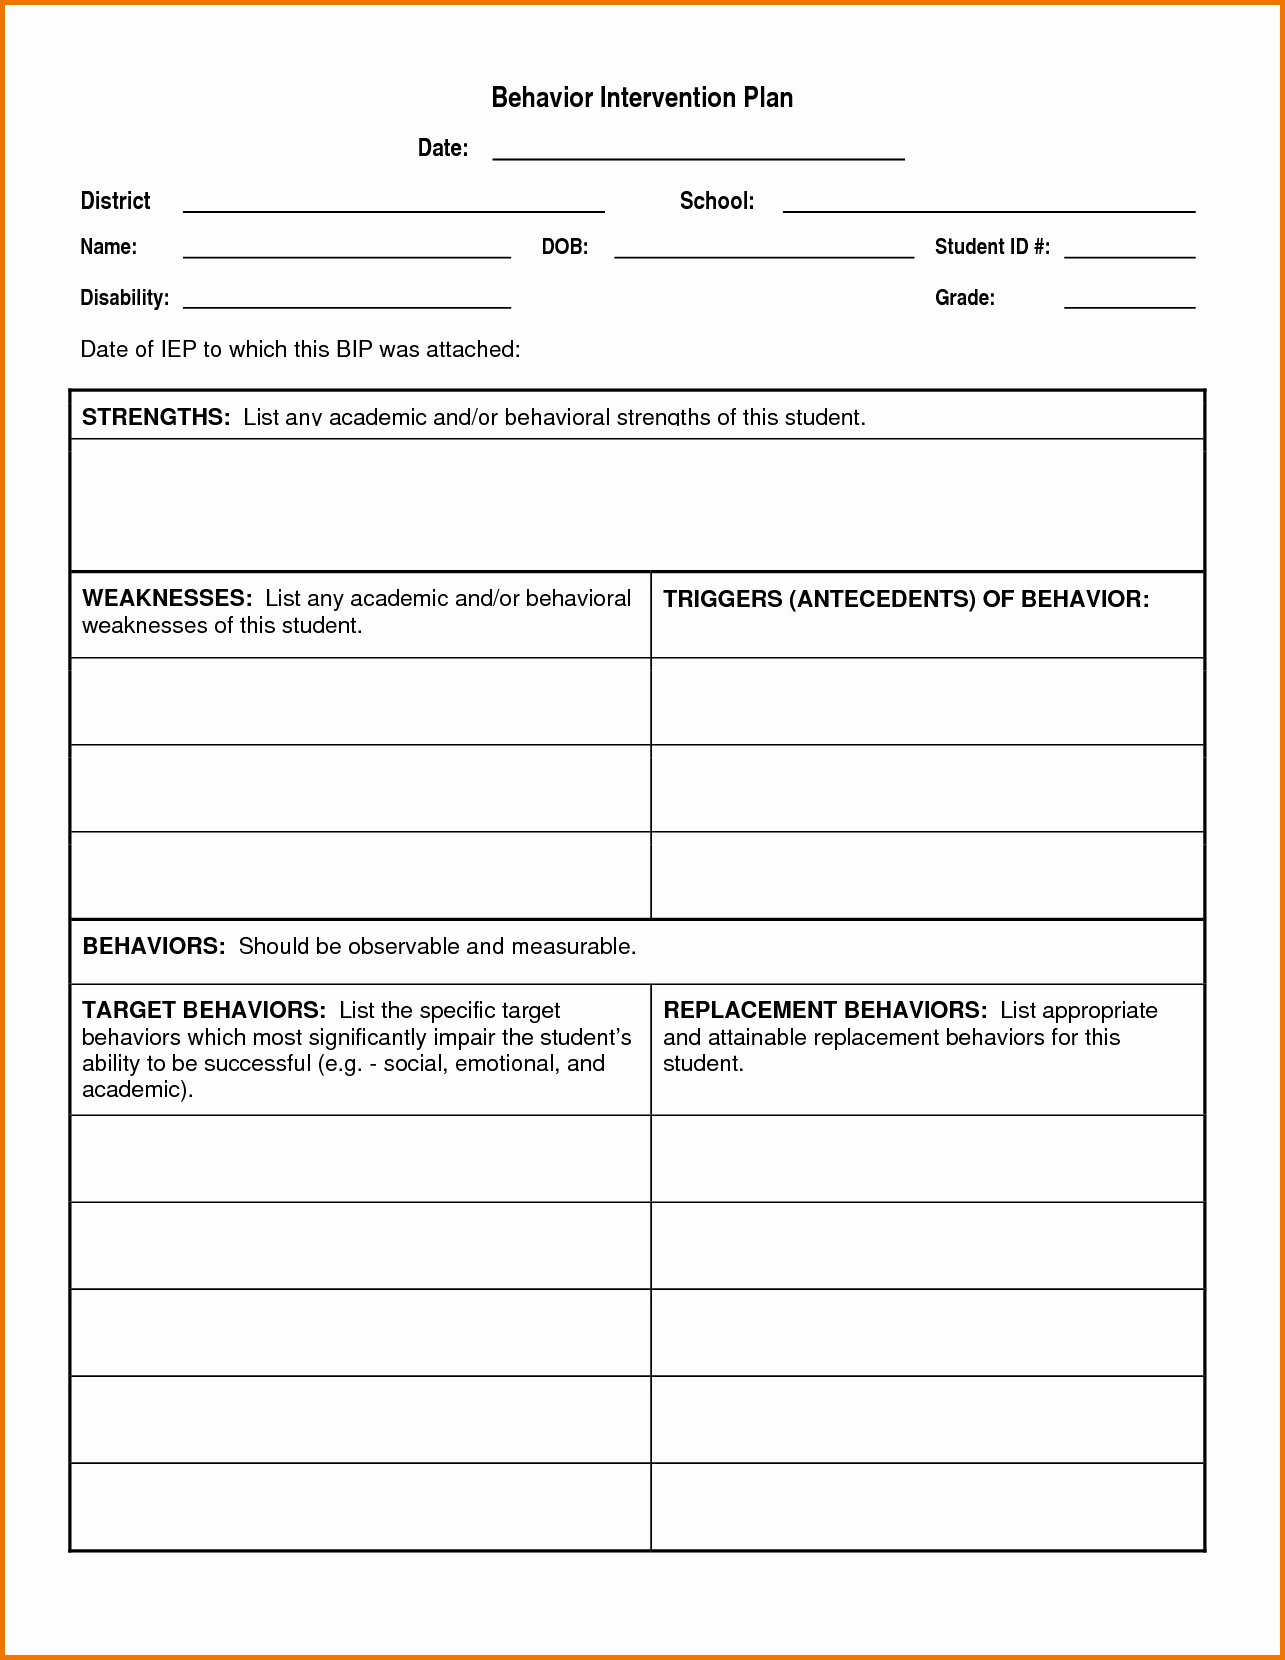 Behavior Intervention Plan Template Free Awesome Goals Of Parentimplemented Intervention – Aba